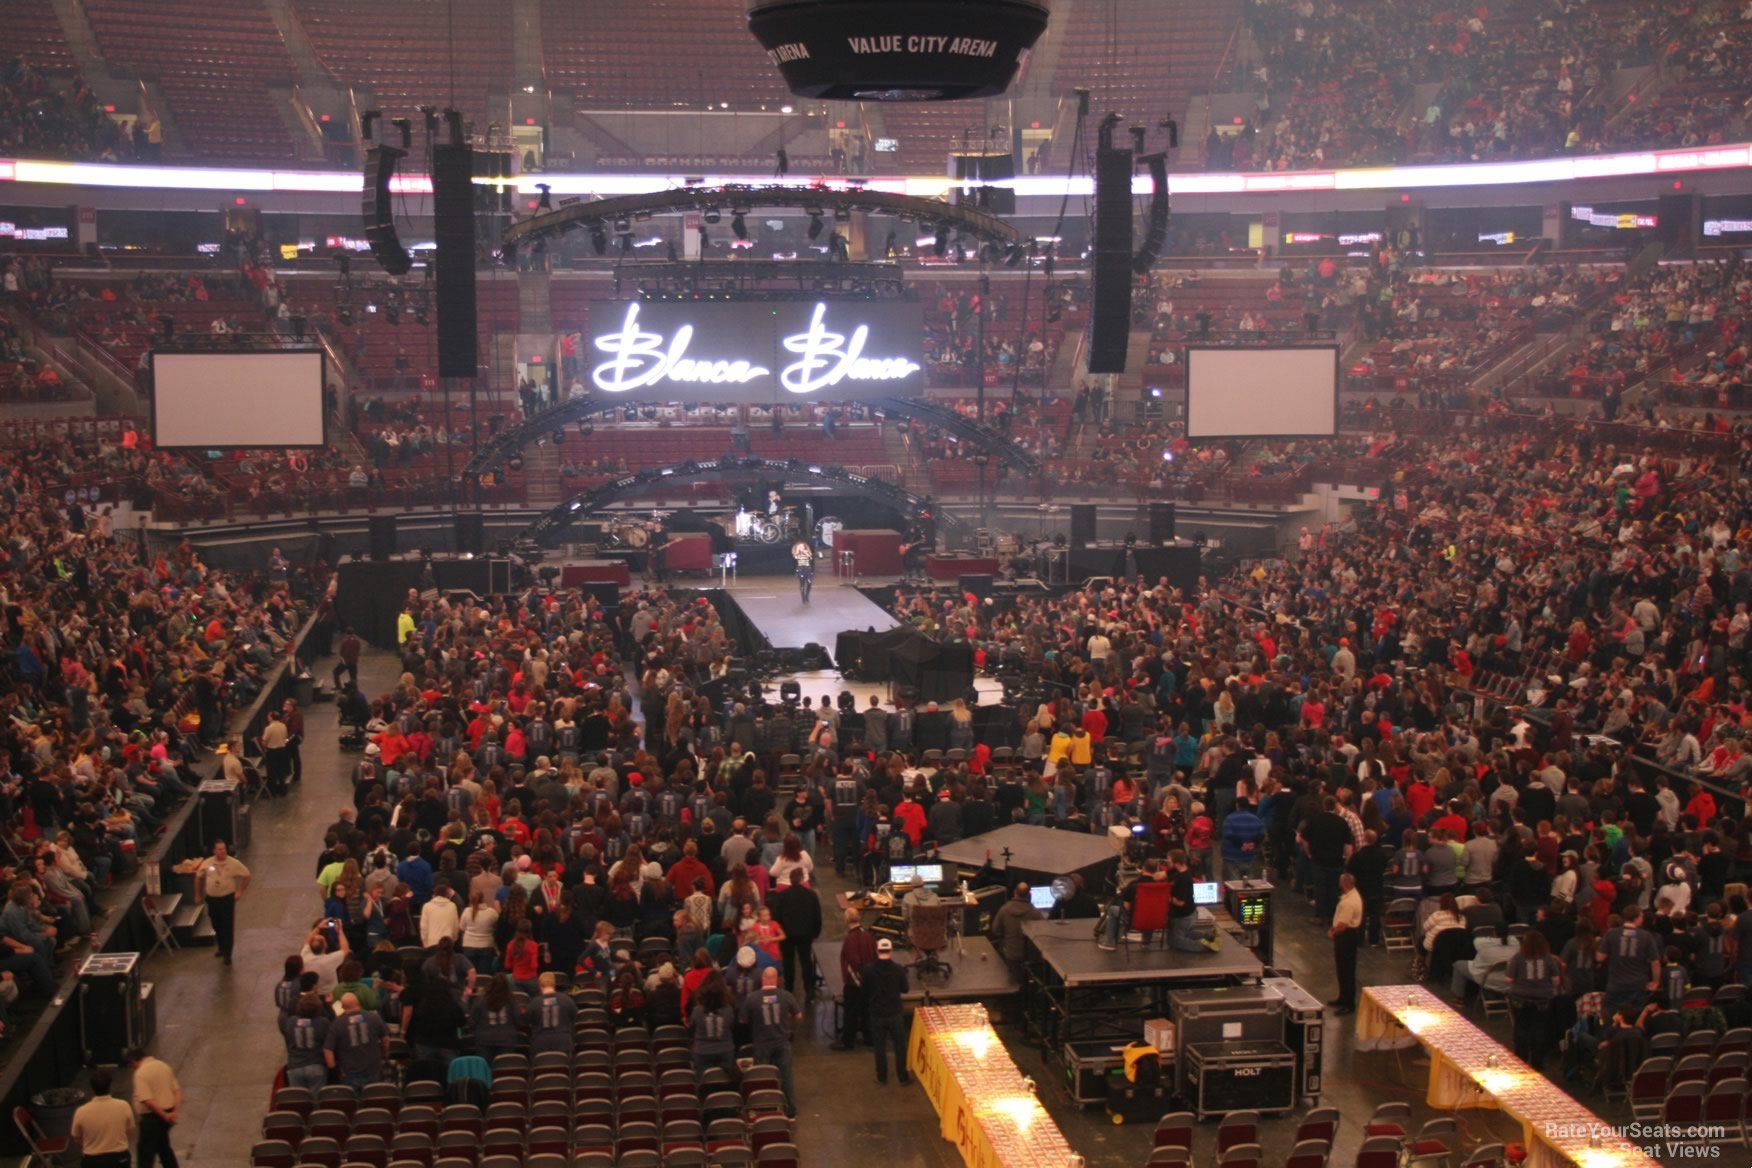 section 232, row d seat view  for concert - schottenstein center